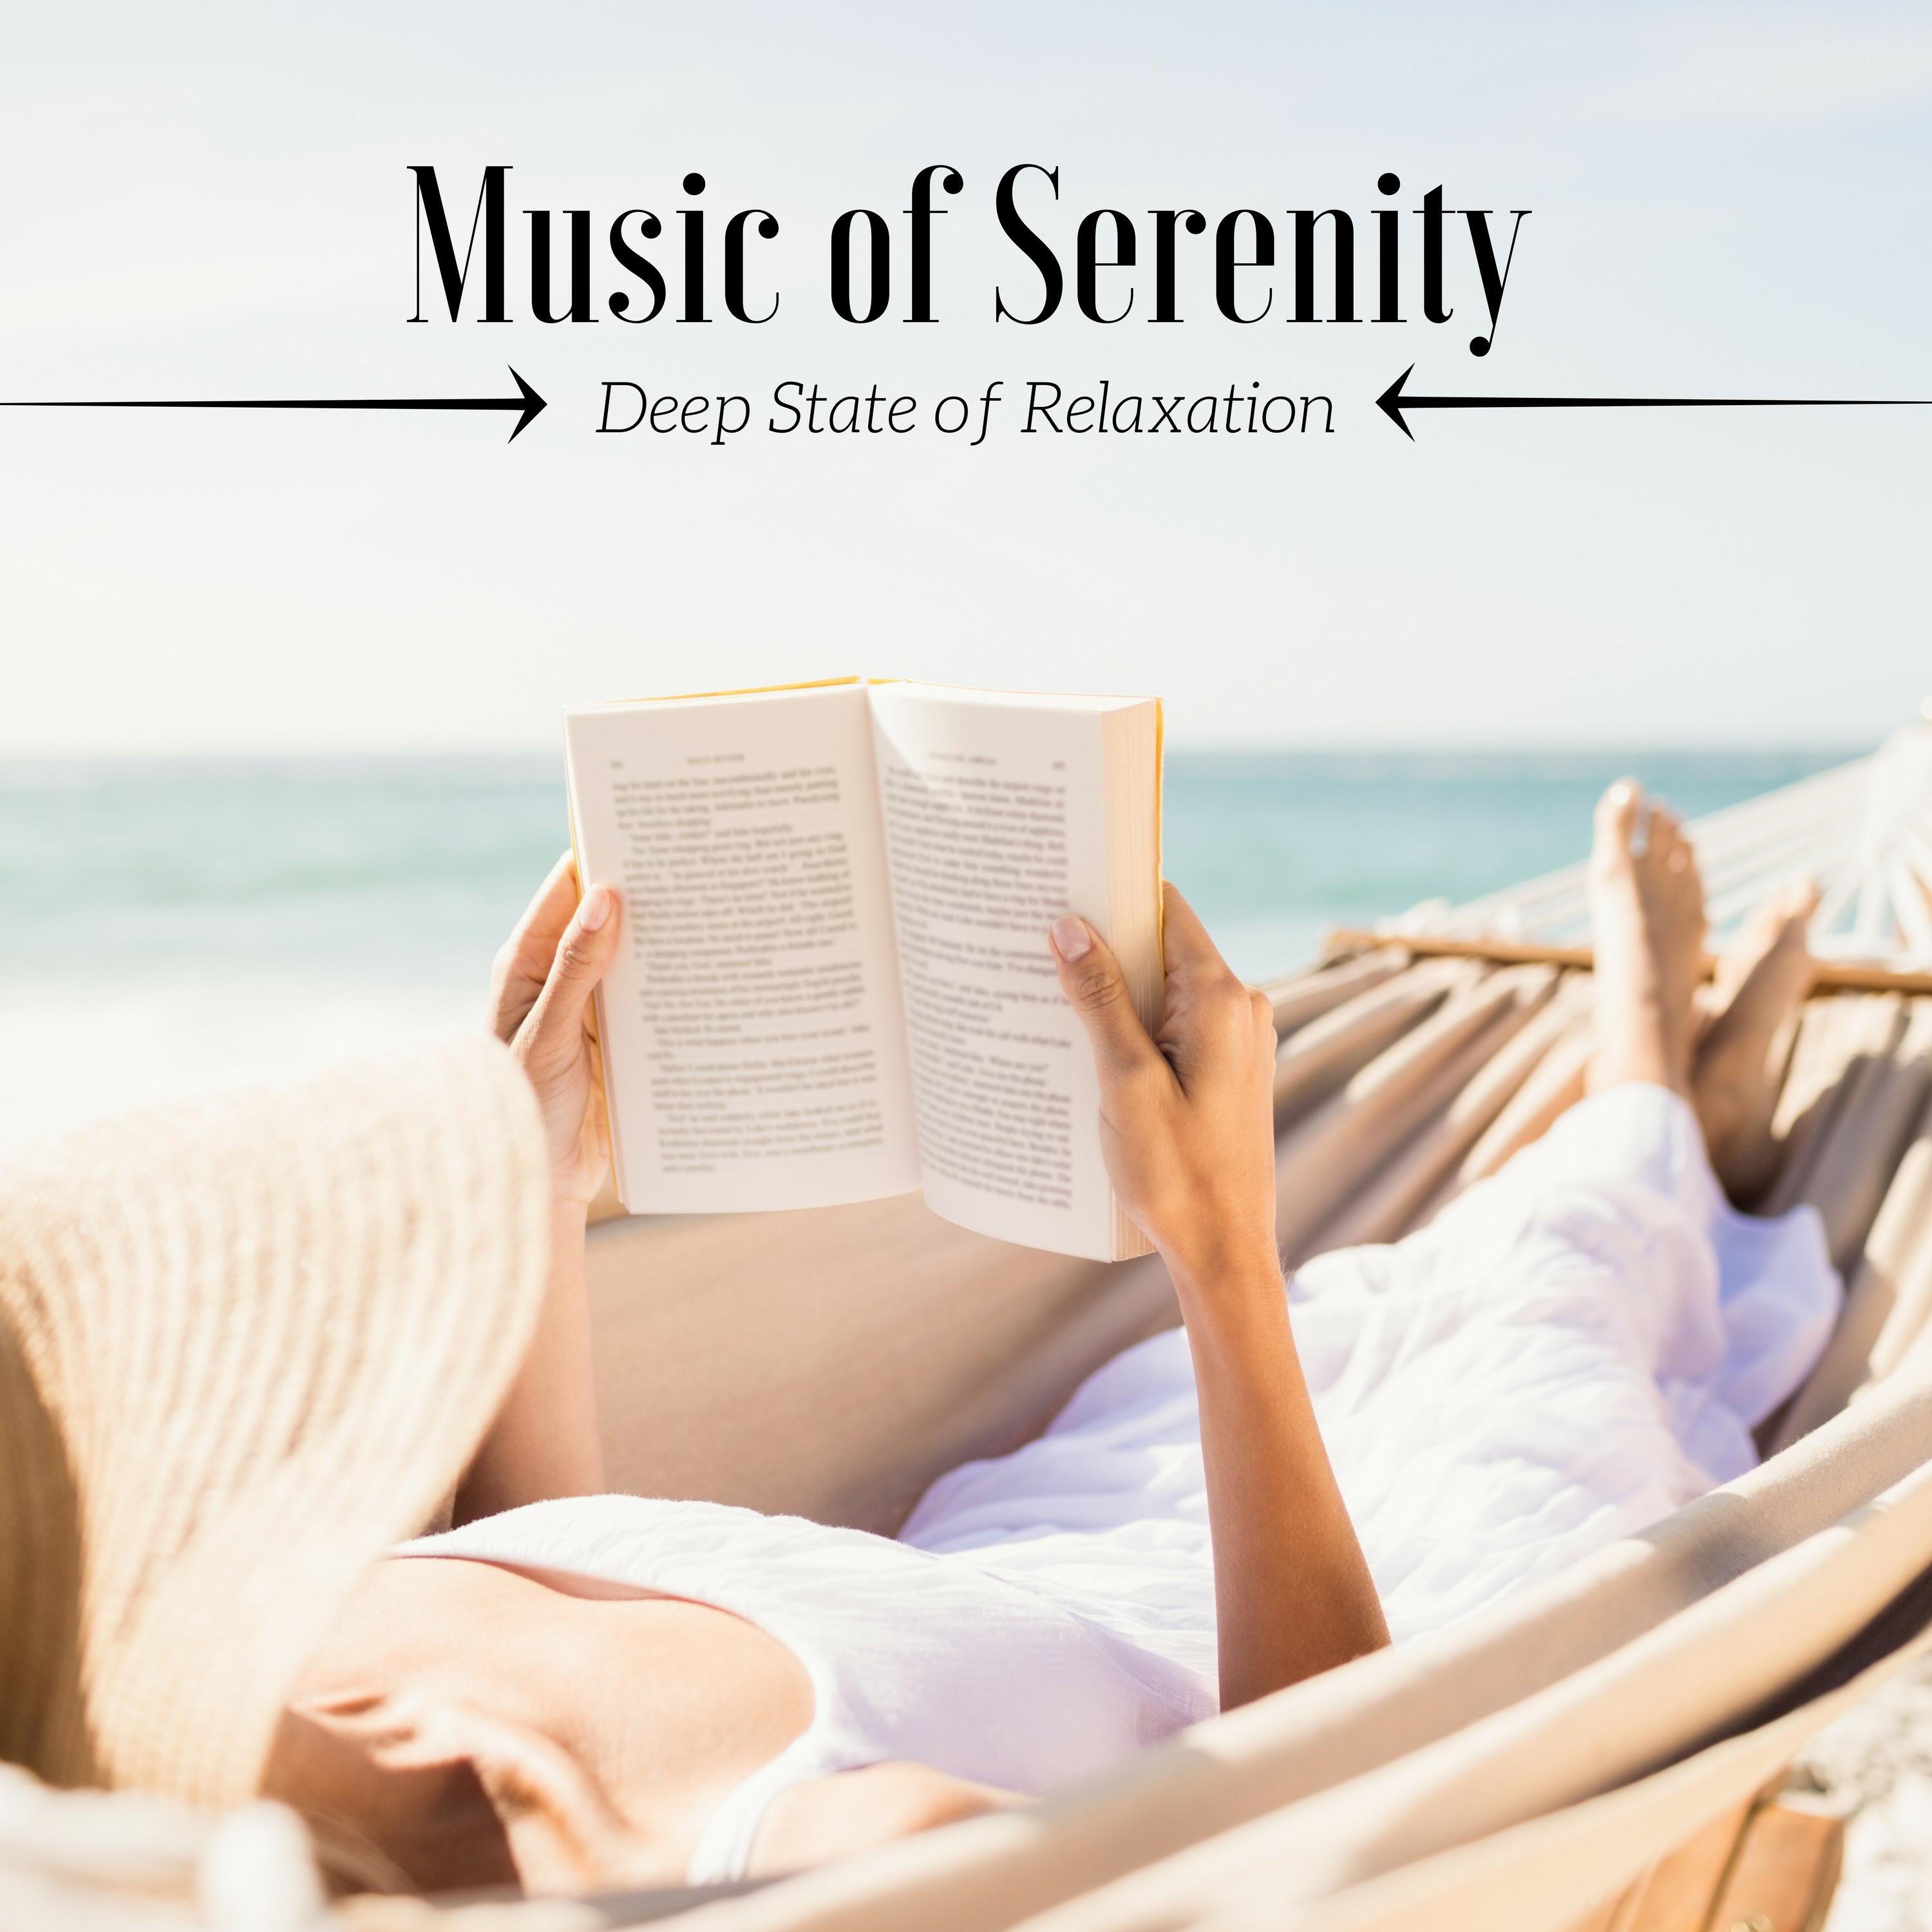 Music of Serenity - Deep State of Relaxation, Nature Sounds, Health and Well-Being